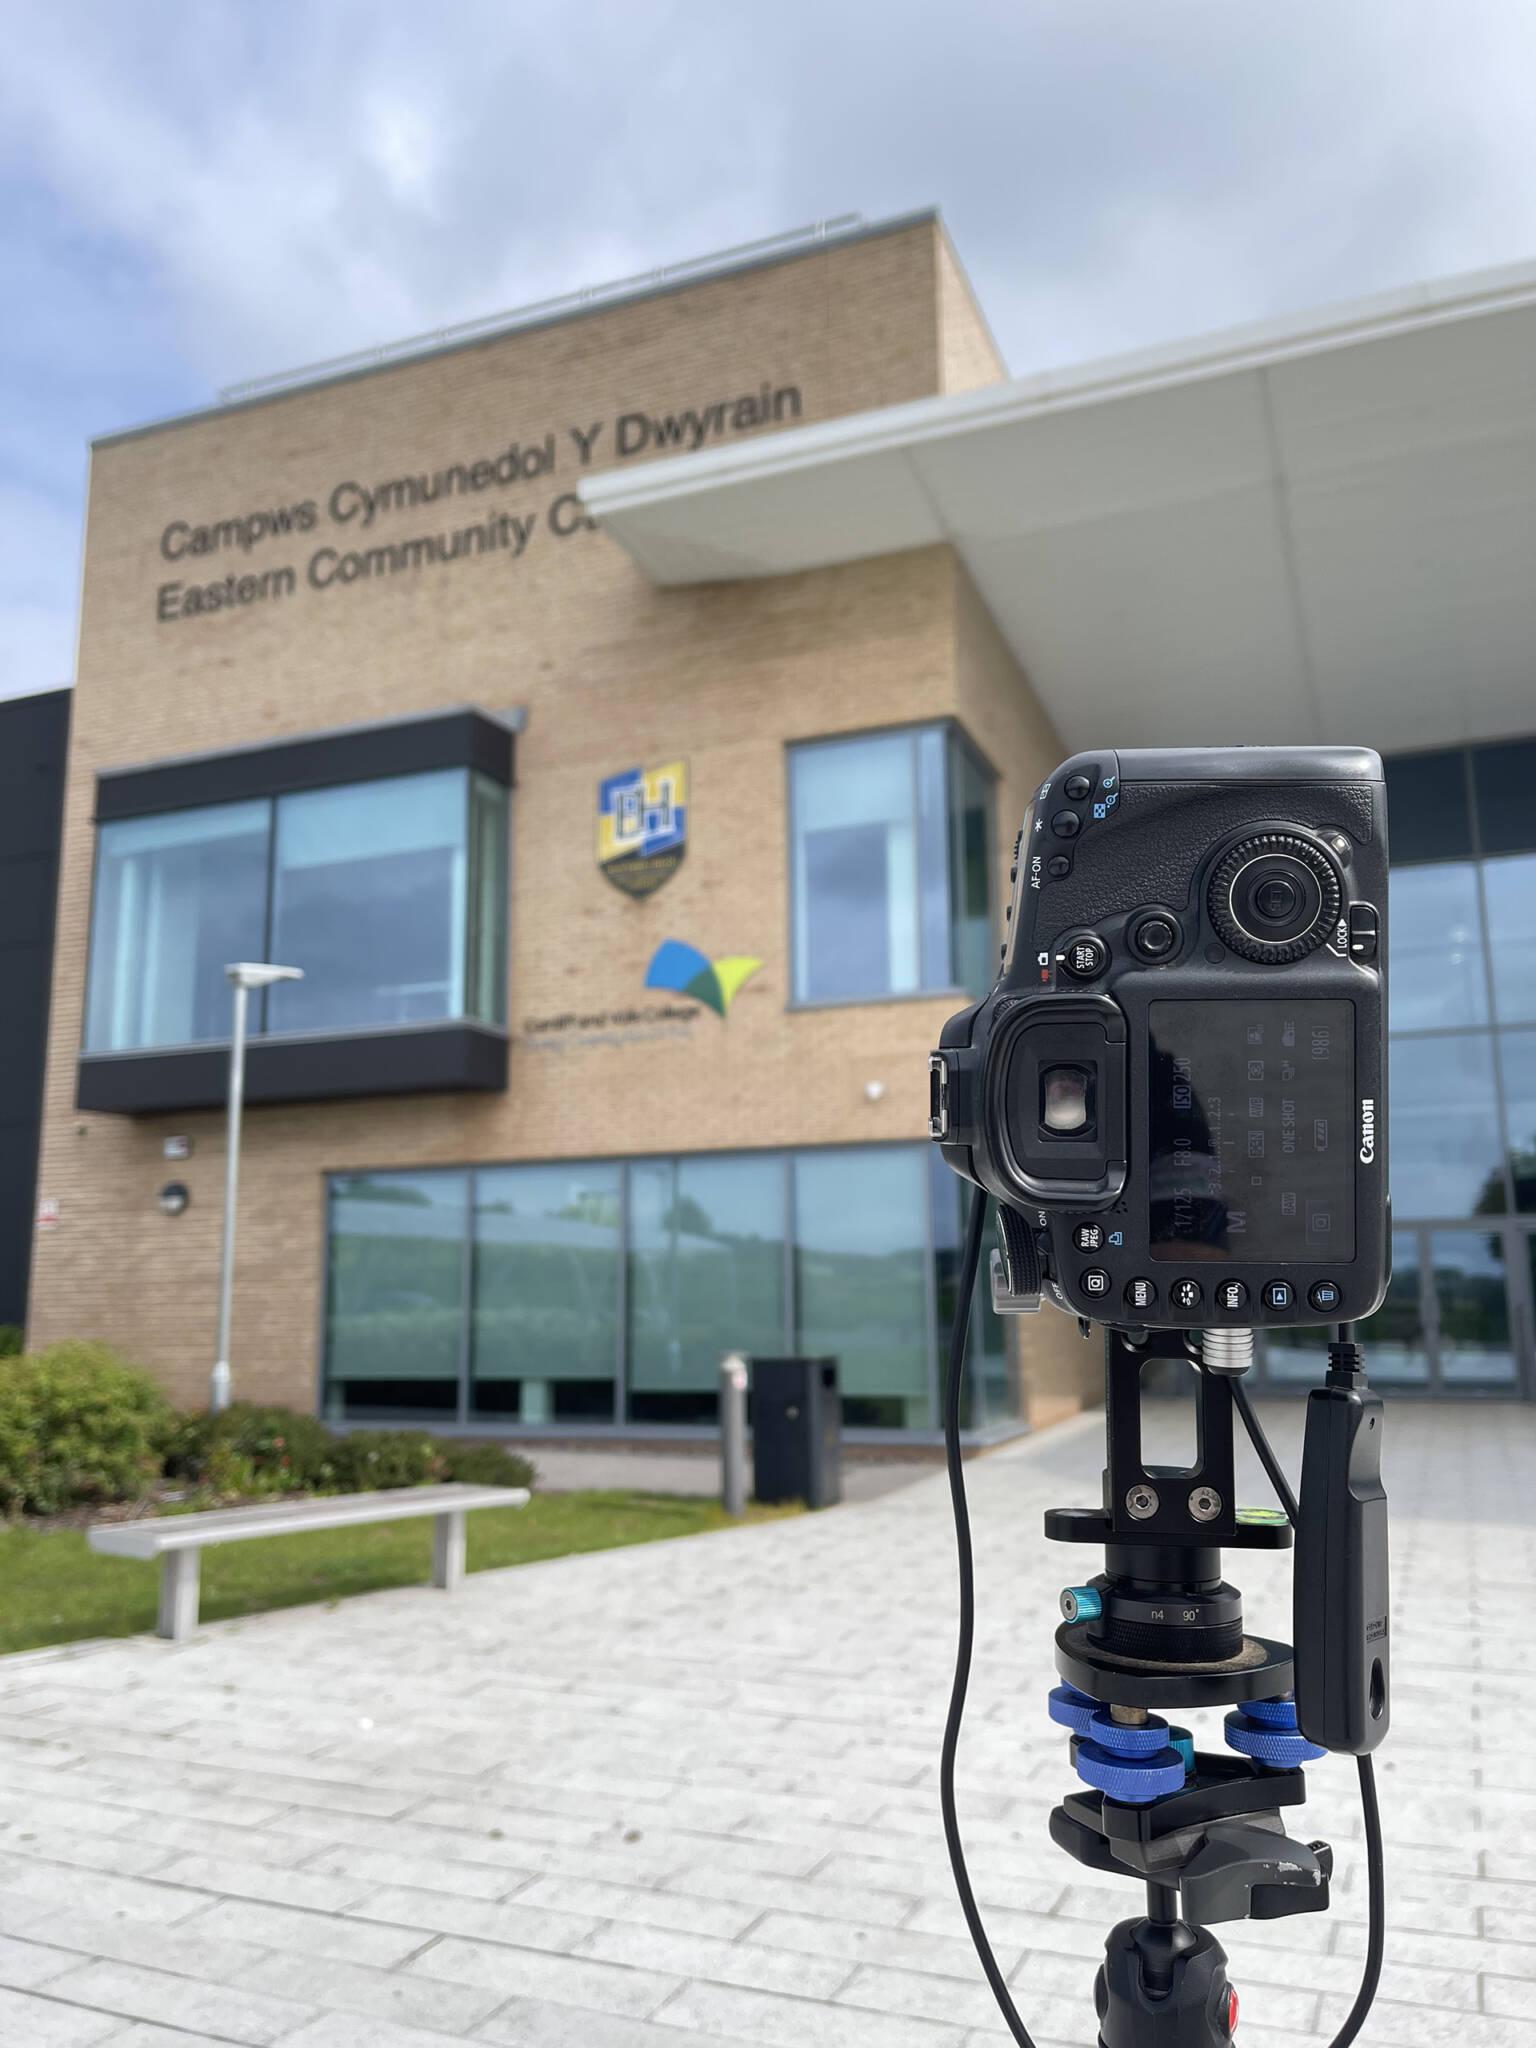 Canon camera creating 360 Virtual Tour of Cardiff and Vale College, Eastern Community Campus.